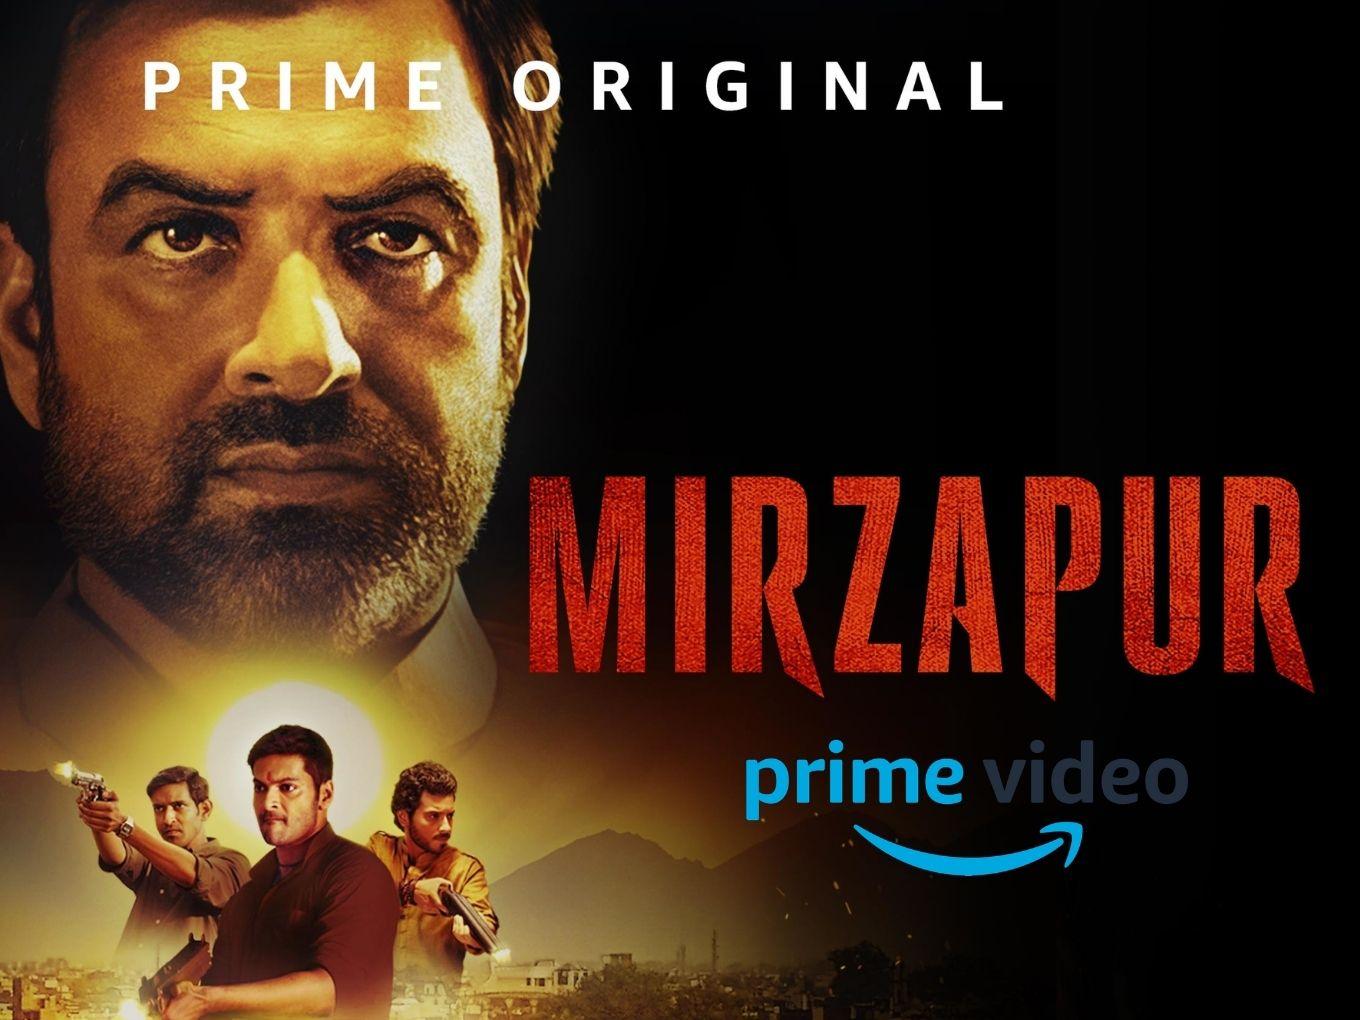 Supreme Court Issues Notice To Amazon Prime Over Mirzapur Case